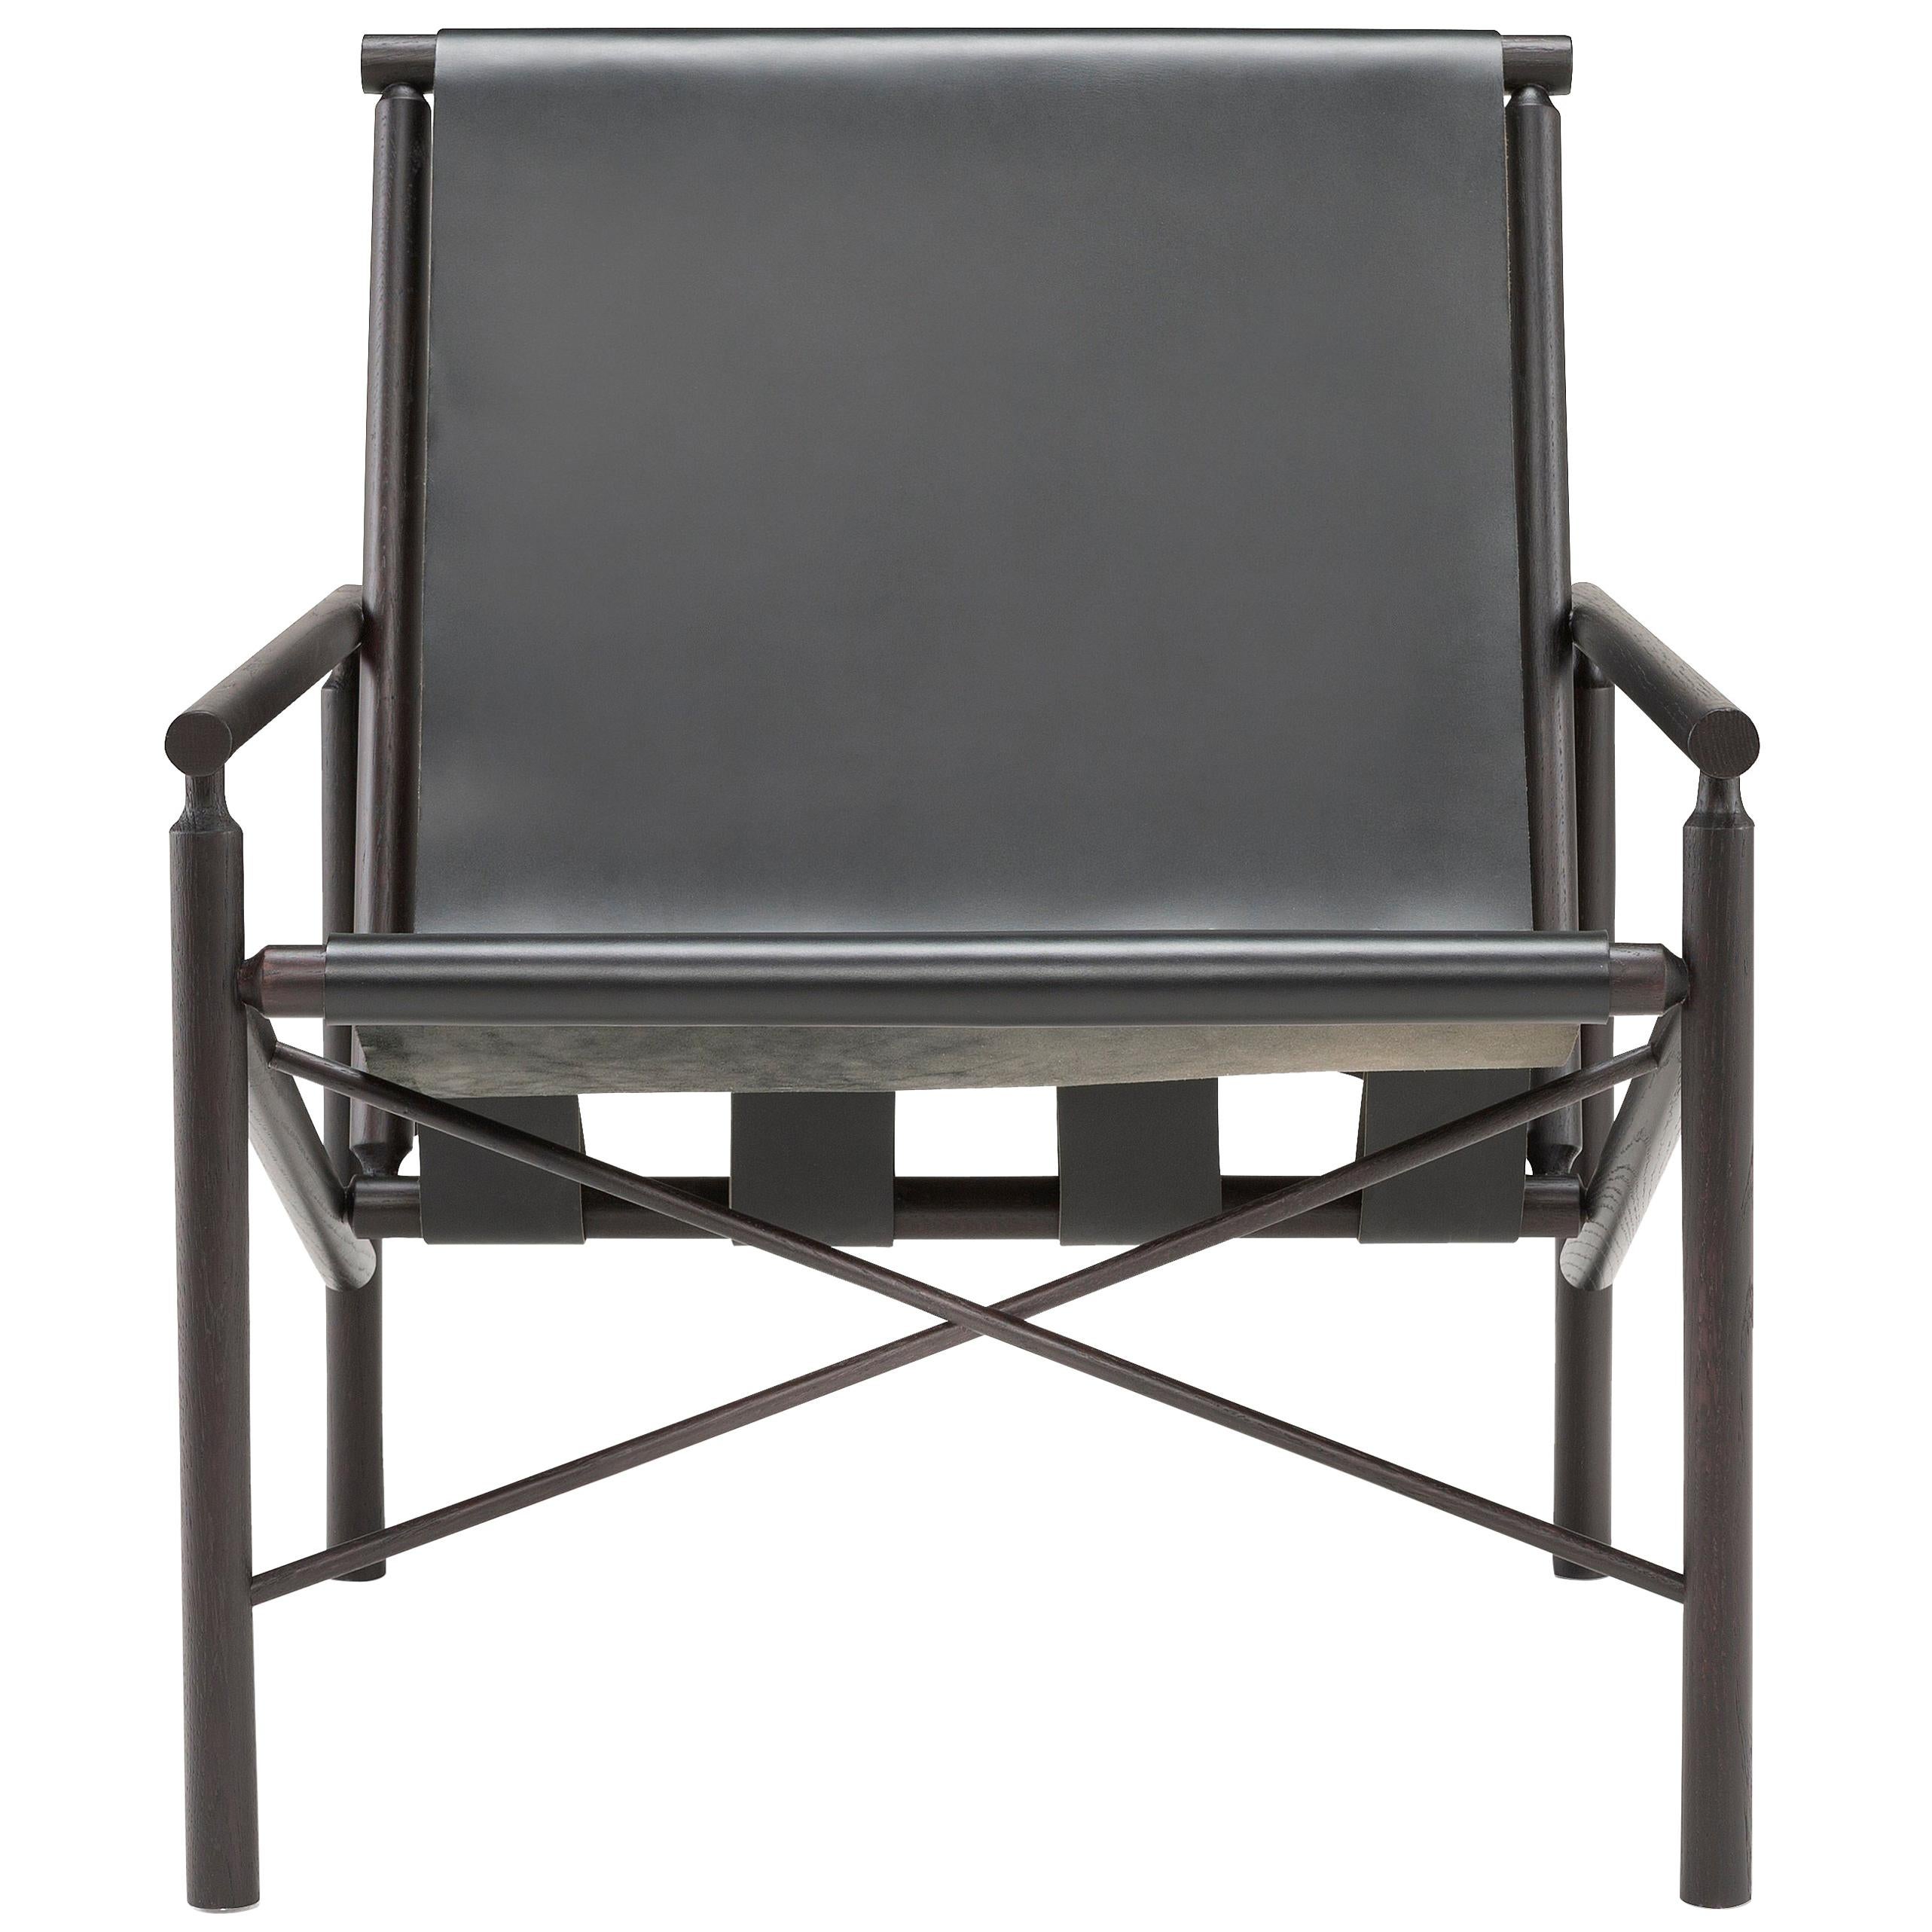 Amura 'Ease' Chair in Dark Wood and Charcoal Leather by Gareth Neal For Sale